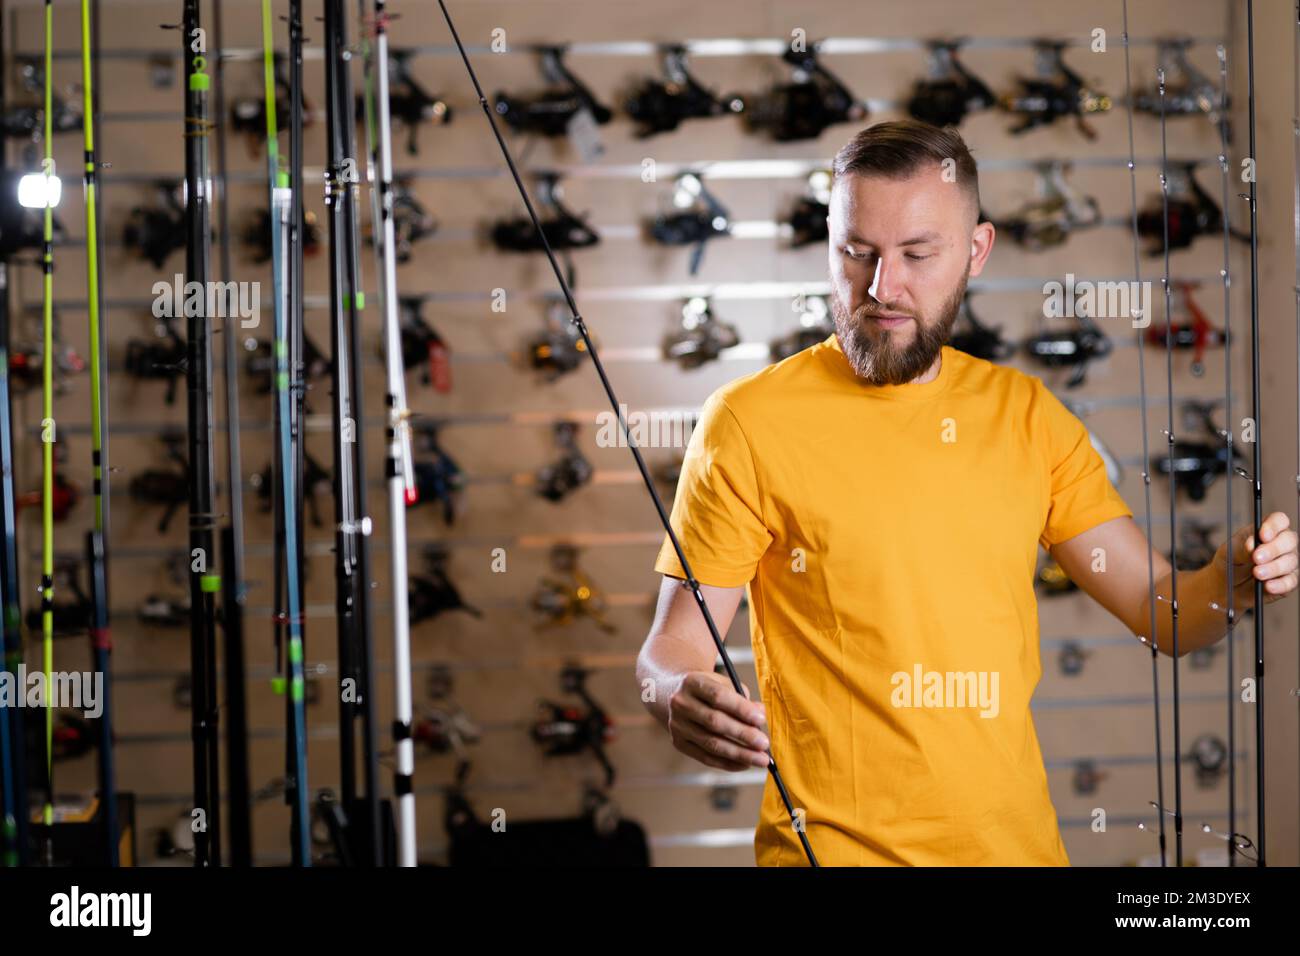 Millennial man chooses fishing rod in the sports shop, fishing store, copy space Stock Photo